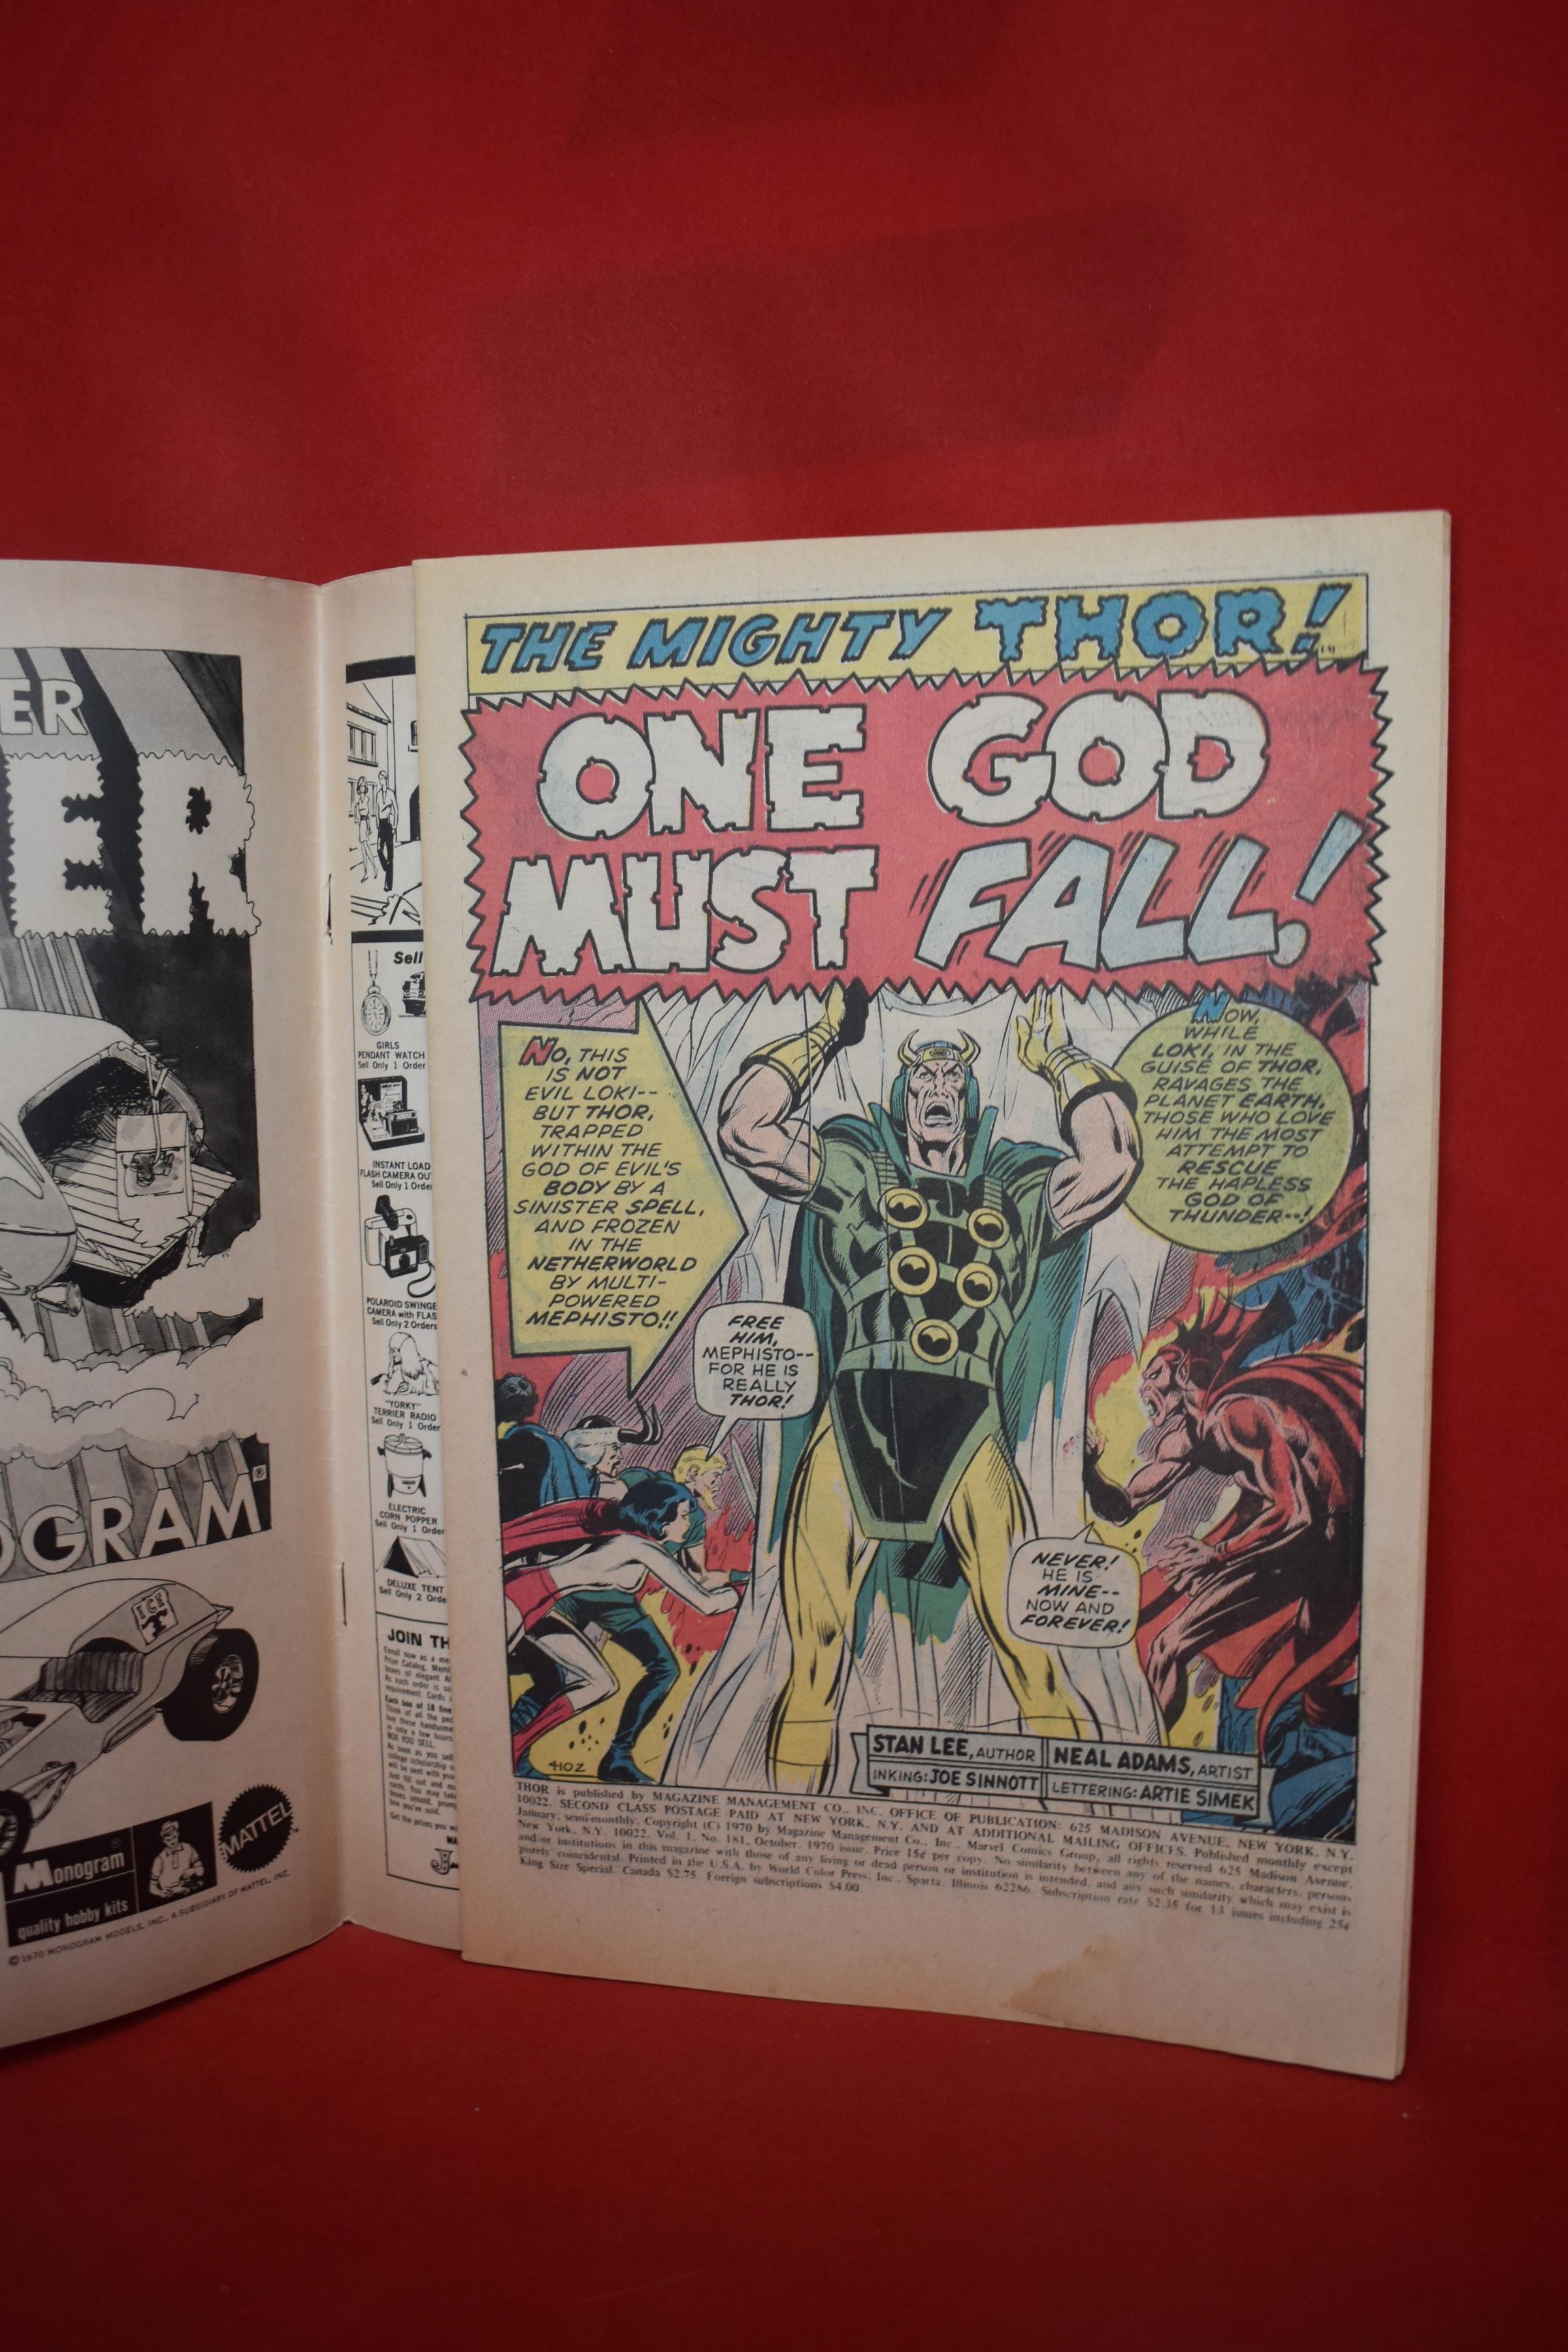 THOR #181 | ONE GOD MUST FALL! | CLASSIC NEAL ADAMS - 1970 | *DETACHED COVER*